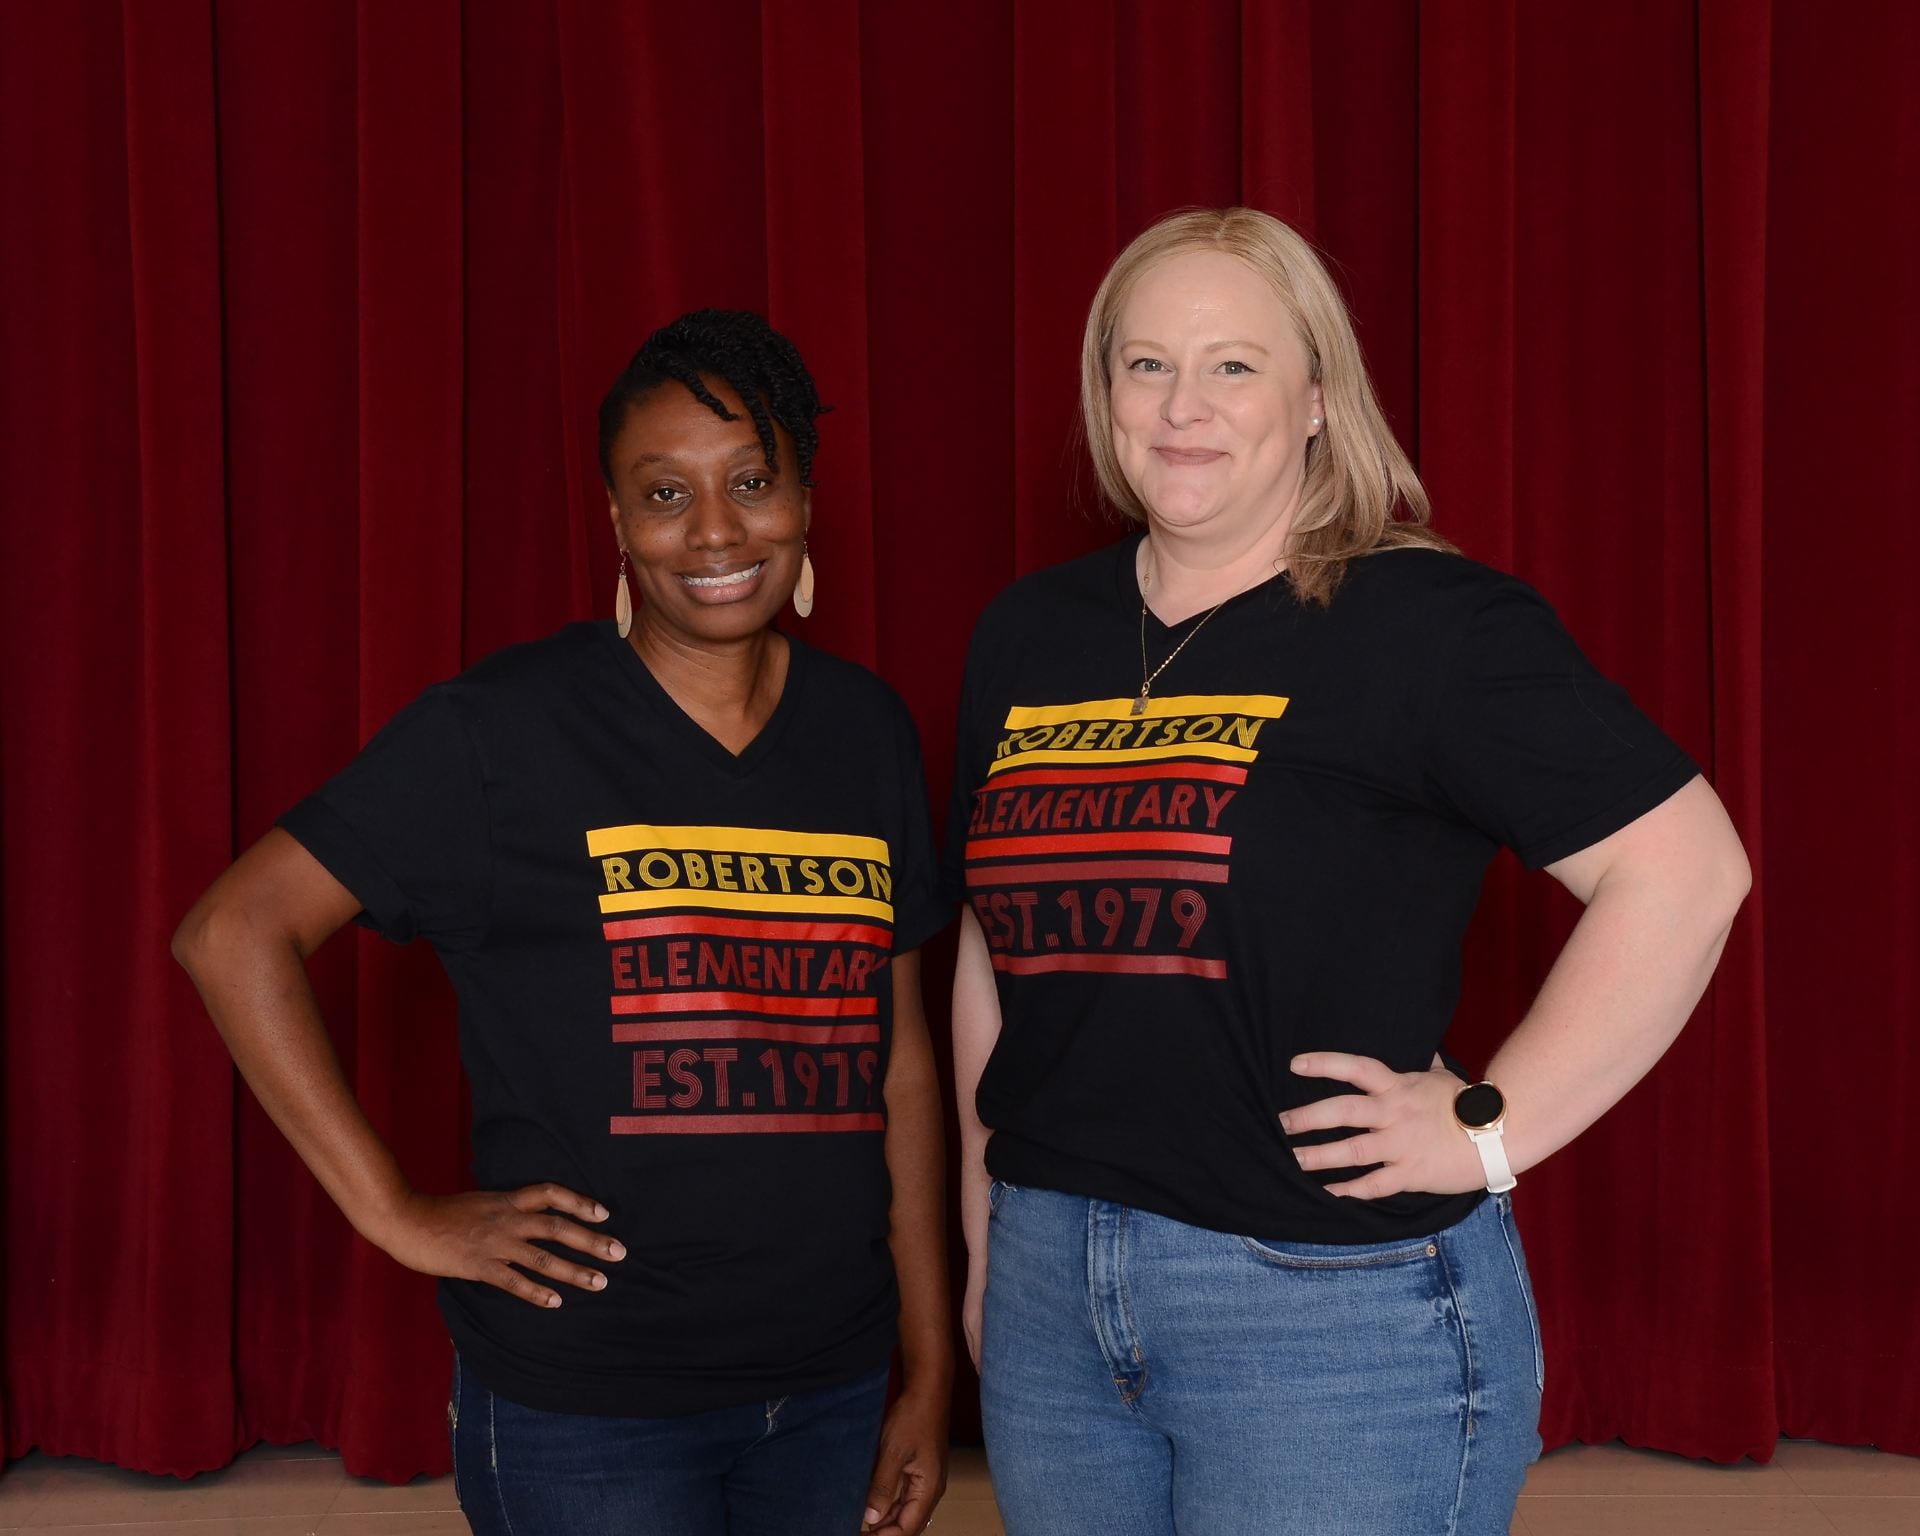 Two staff members wearing matching school shirts, stand in front of a dark background